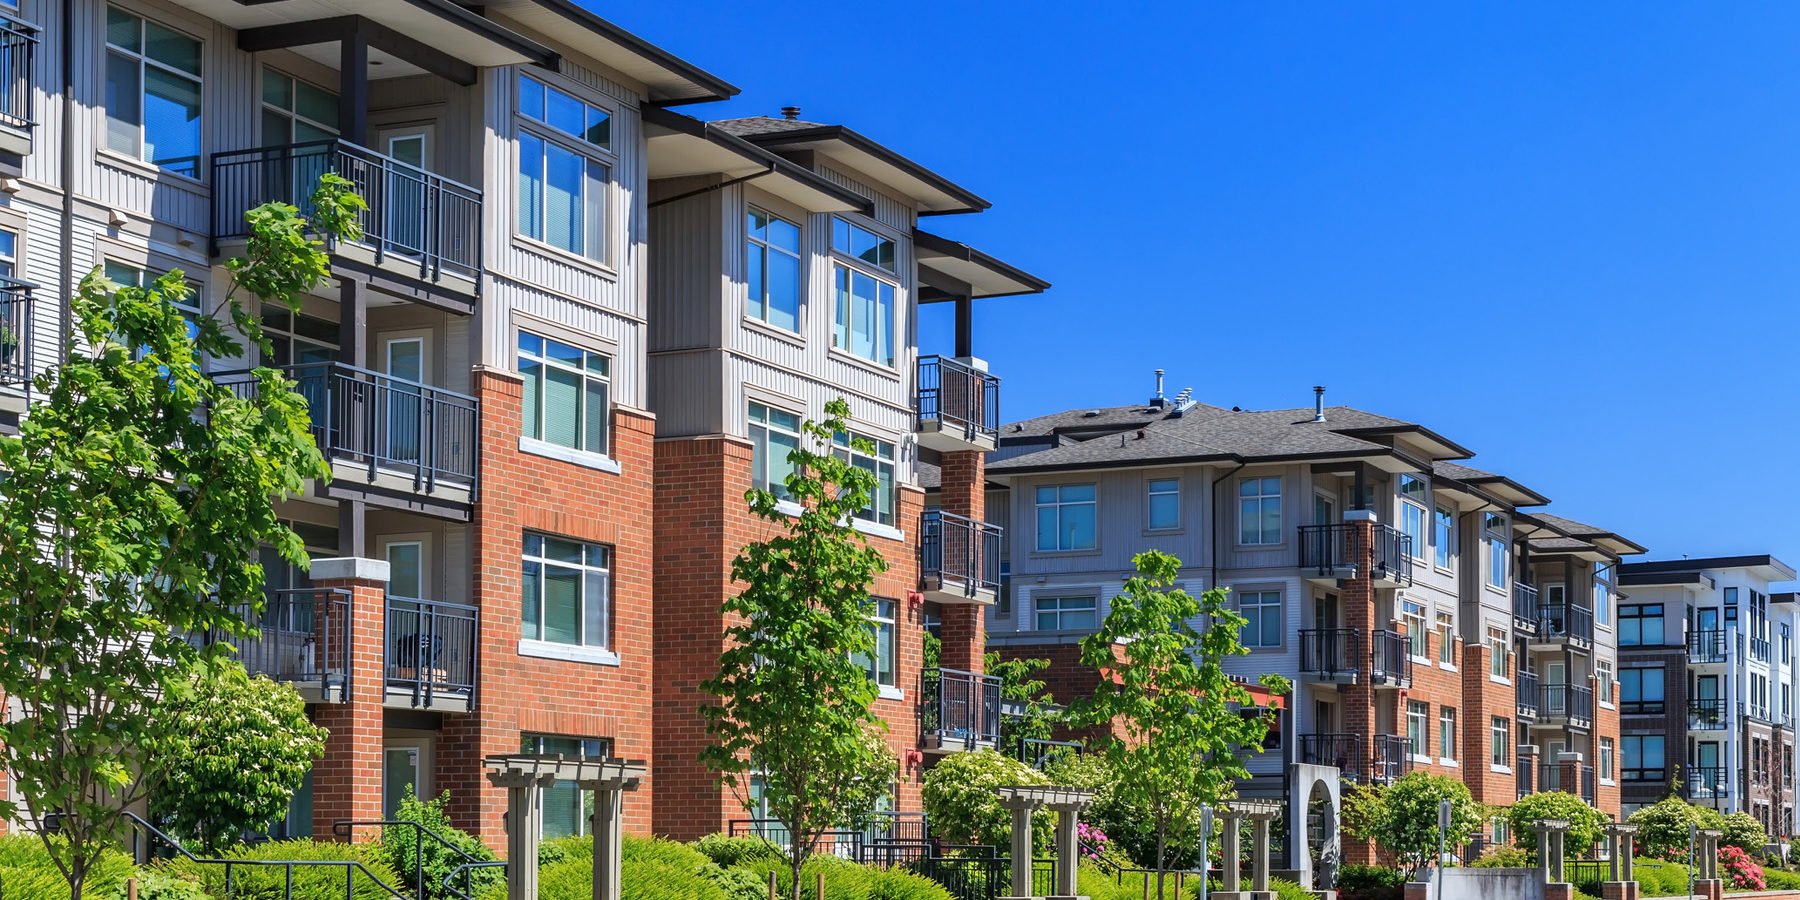 New Rules For Condo Mortgages By Freddie Mac | Defects In Condo Buildings May Hold Up Sales Or Reduce Prices